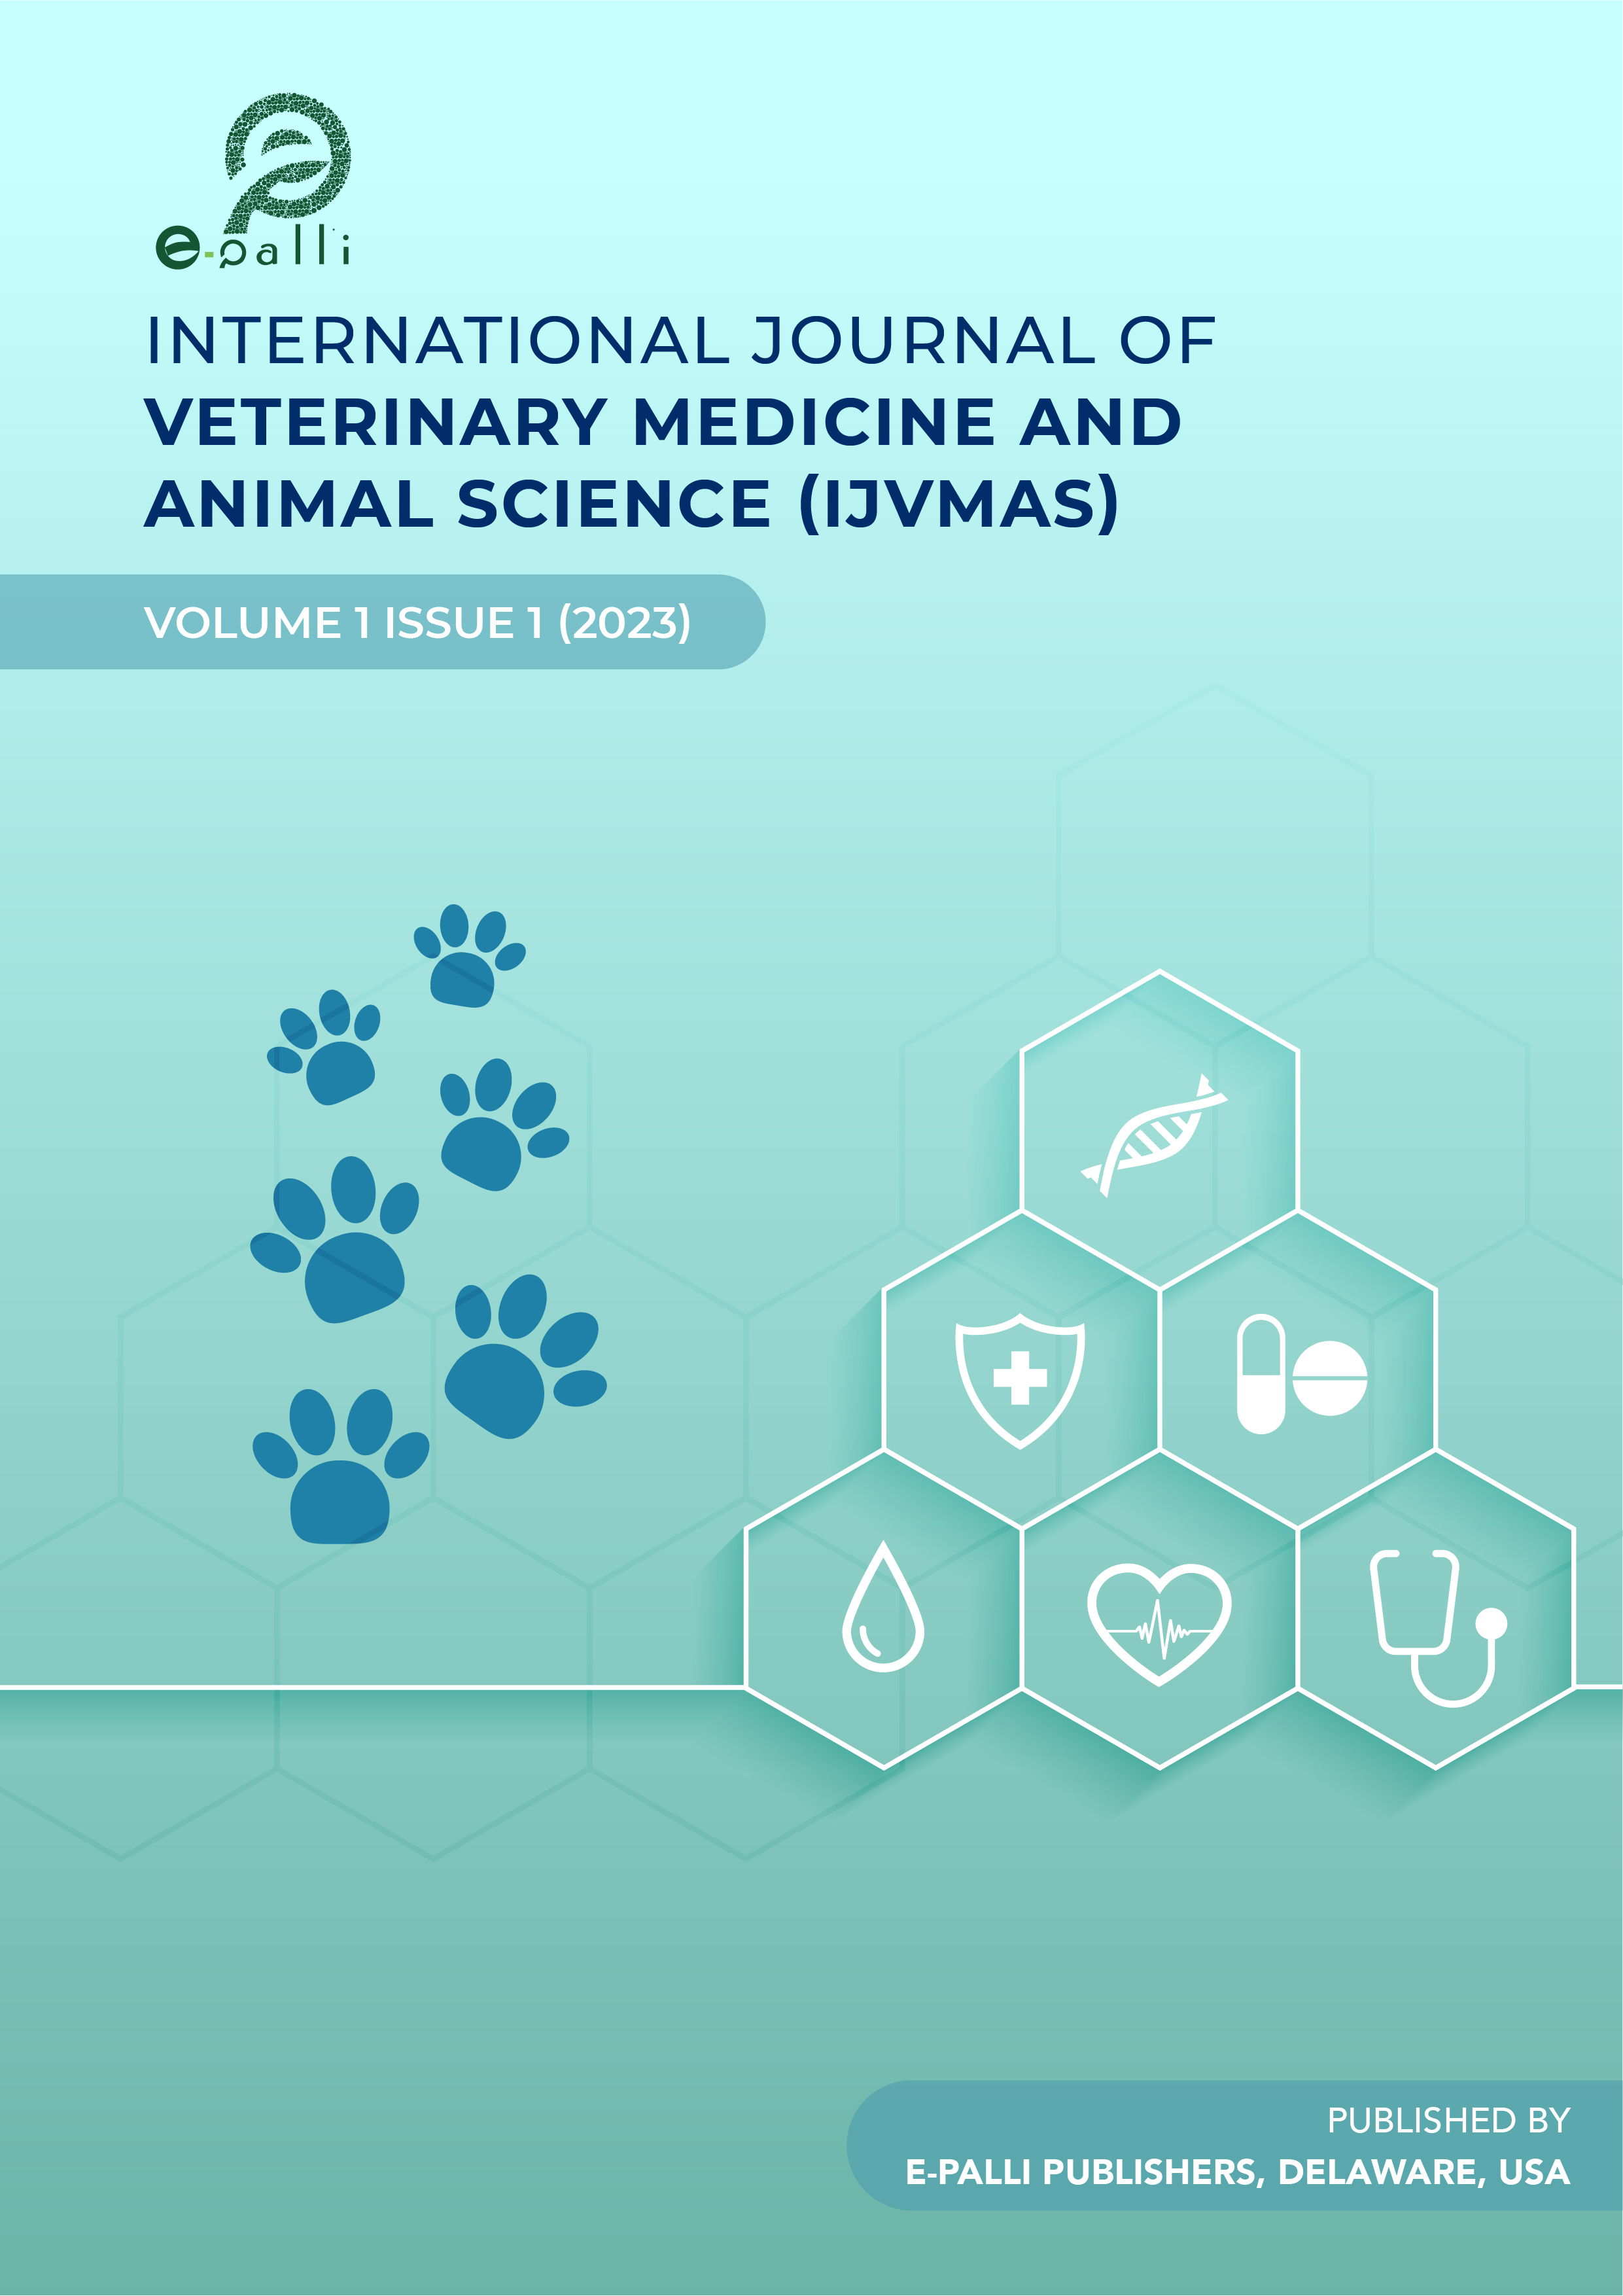 					View Vol. 1 No. 1 (2023): International Journal of Veterinary Medicine and Animal Science
				